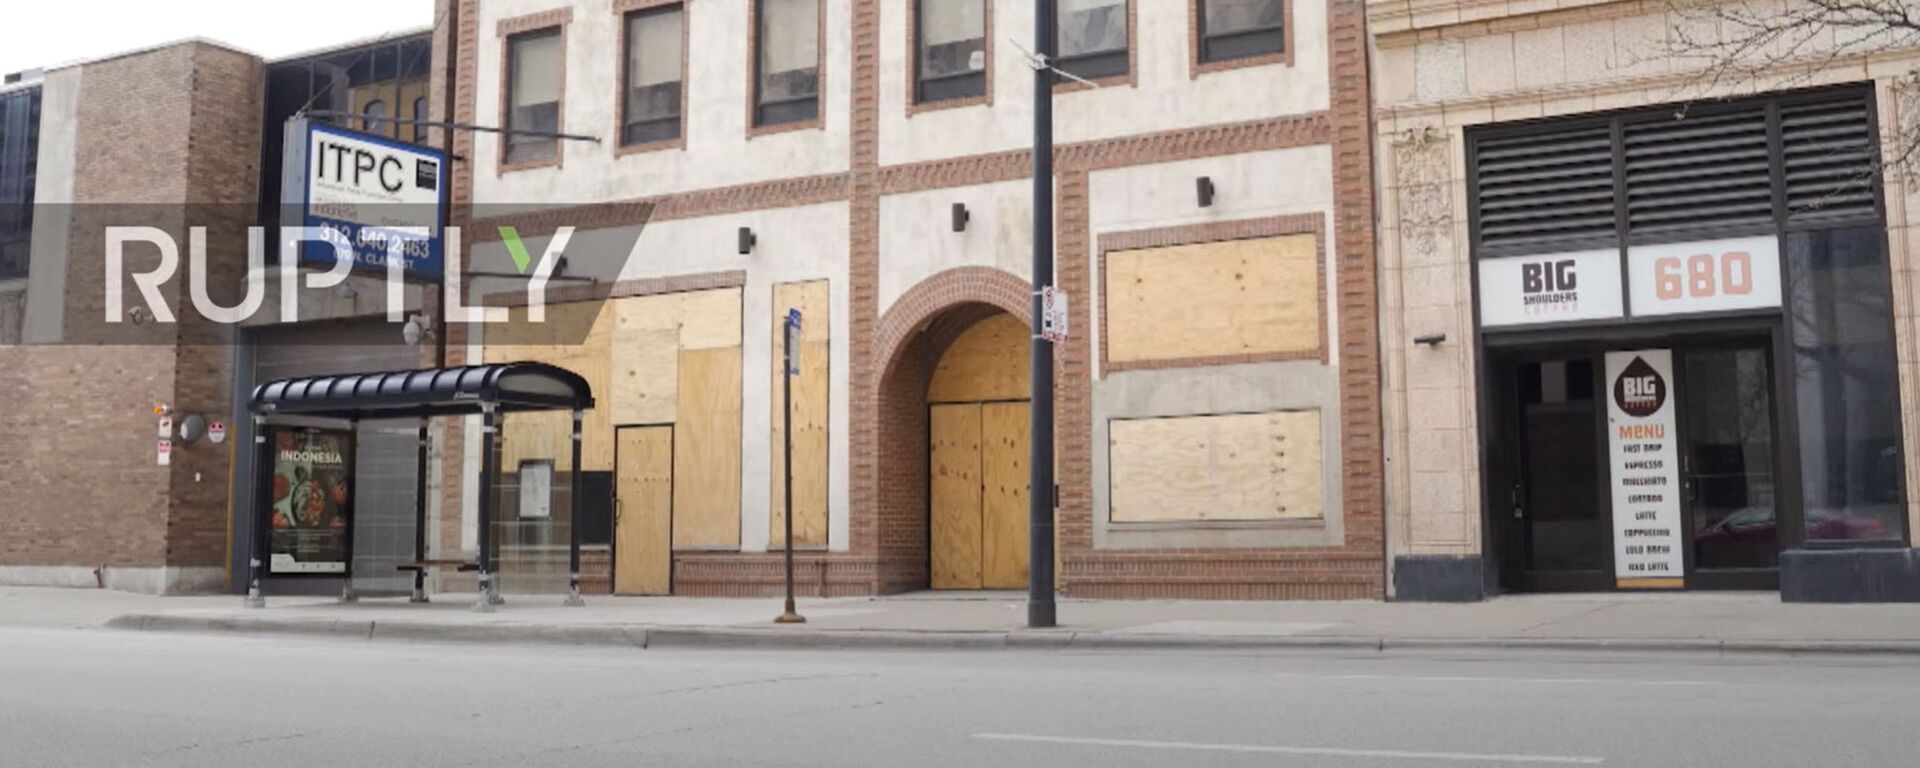 Chicago stores seen boarded up following Chauvin guilty verdict - Sputnik Moldova, 1920, 21.04.2021